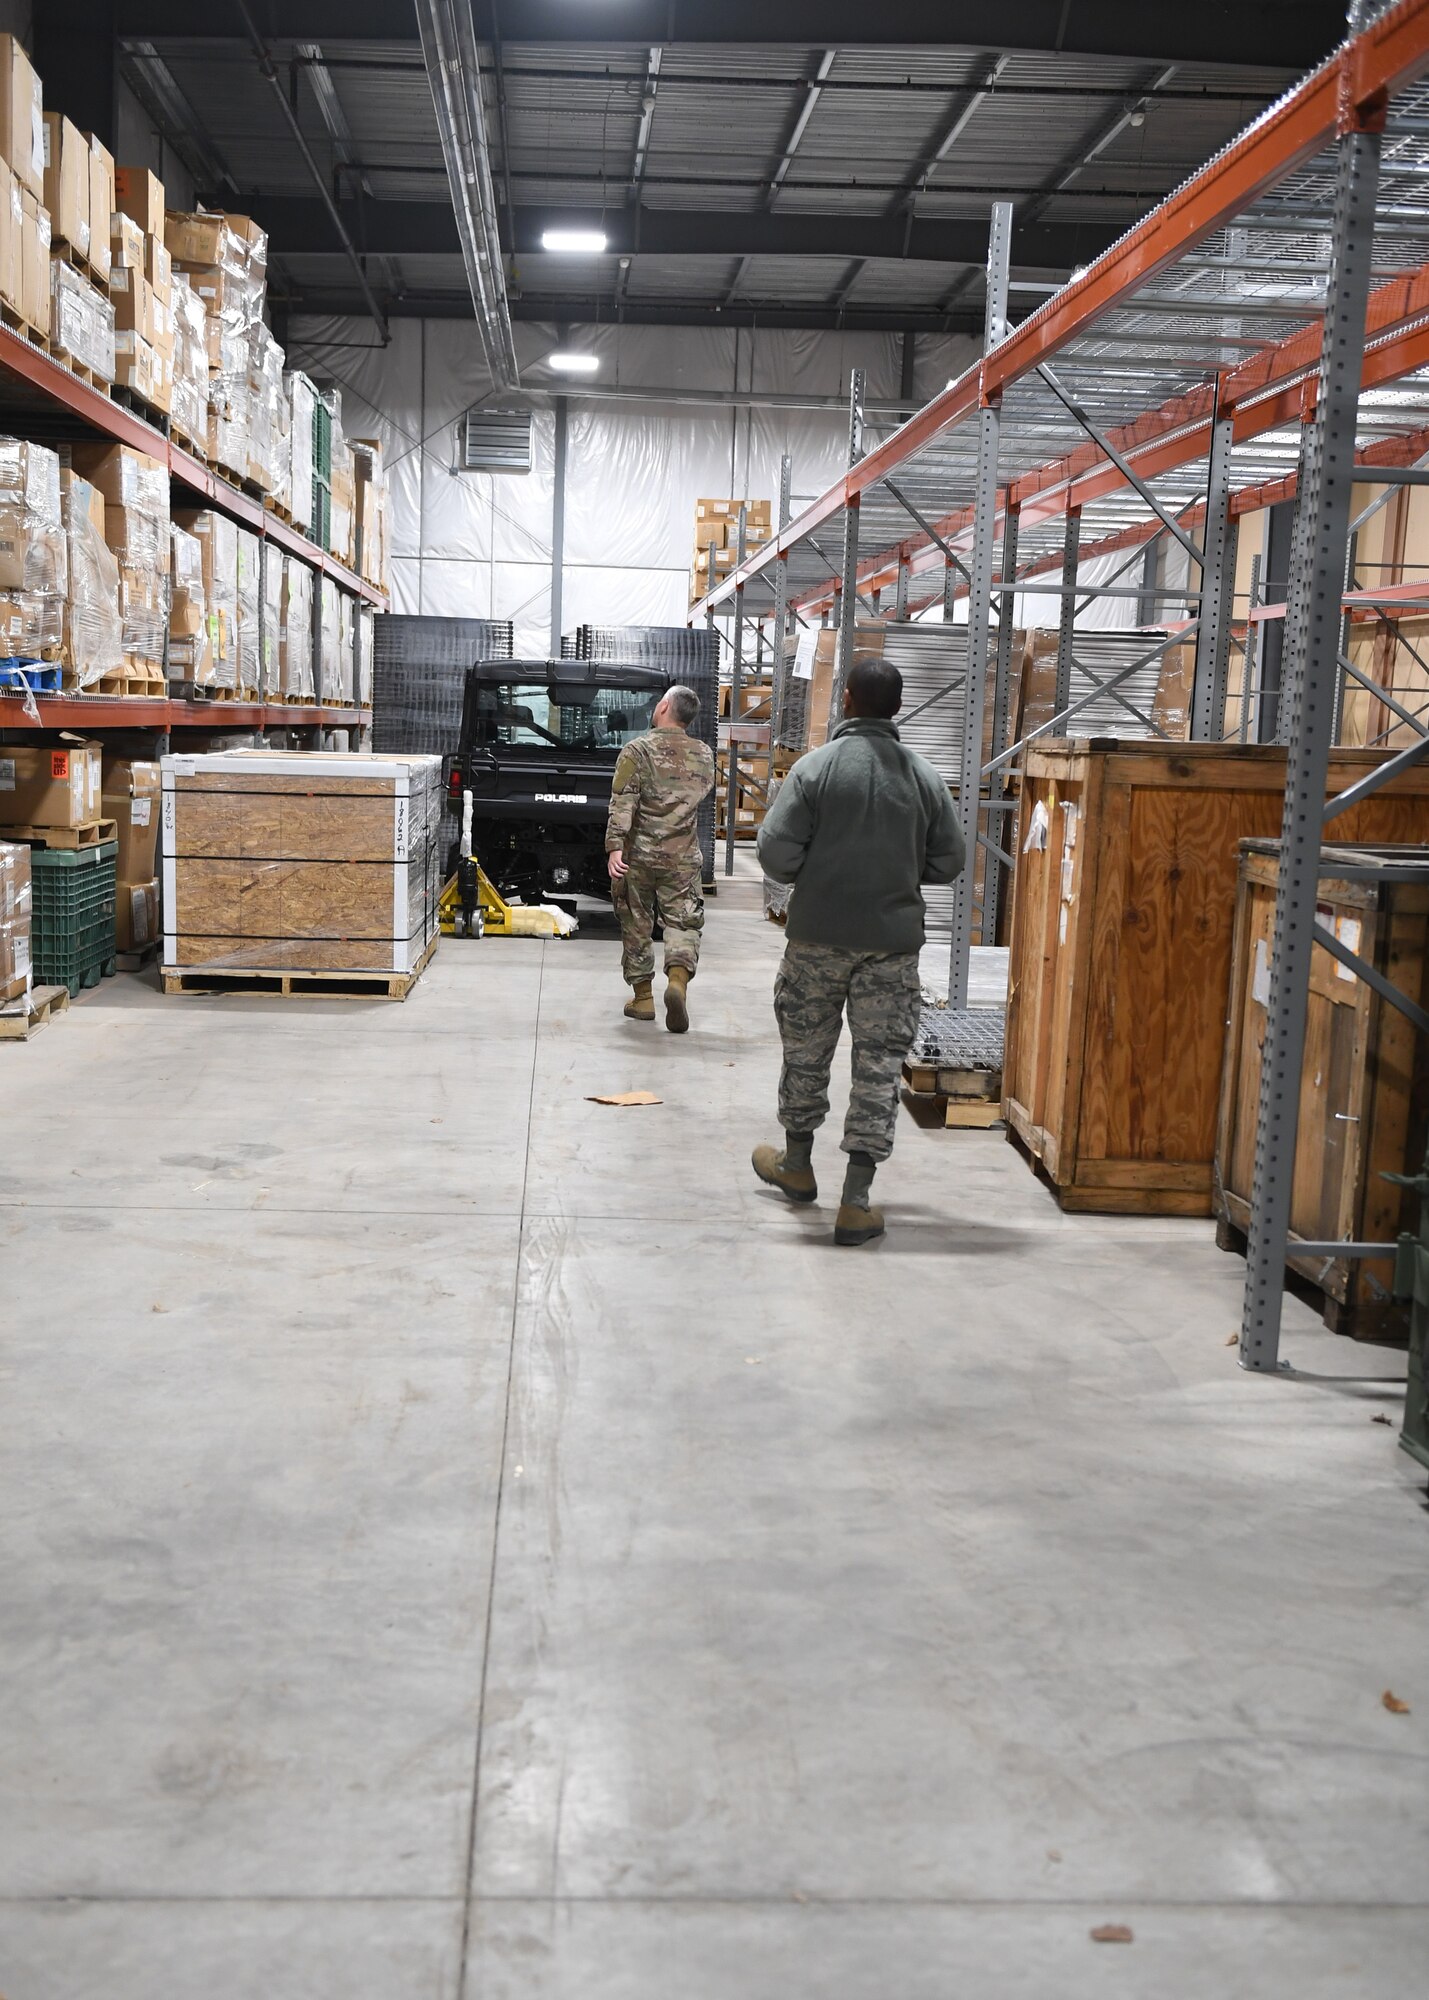 Tech. Sgt. Tobin Civils and Staff Sgt. Mamadou Bah, material management craftsmen with the 911th Logistics Readiness Squadron, walk along the warehouse floor at the Pittsburgh International Airport Air Reserve Station, Pennsylvania, Feb. 14, 2019. The warehouse became operational in early November and is expected to eventually hold gas masks and training gear once they are done moving from their previous location in building 320. (U.S. Air Force Photo by Senior Airman Grace Thomson)